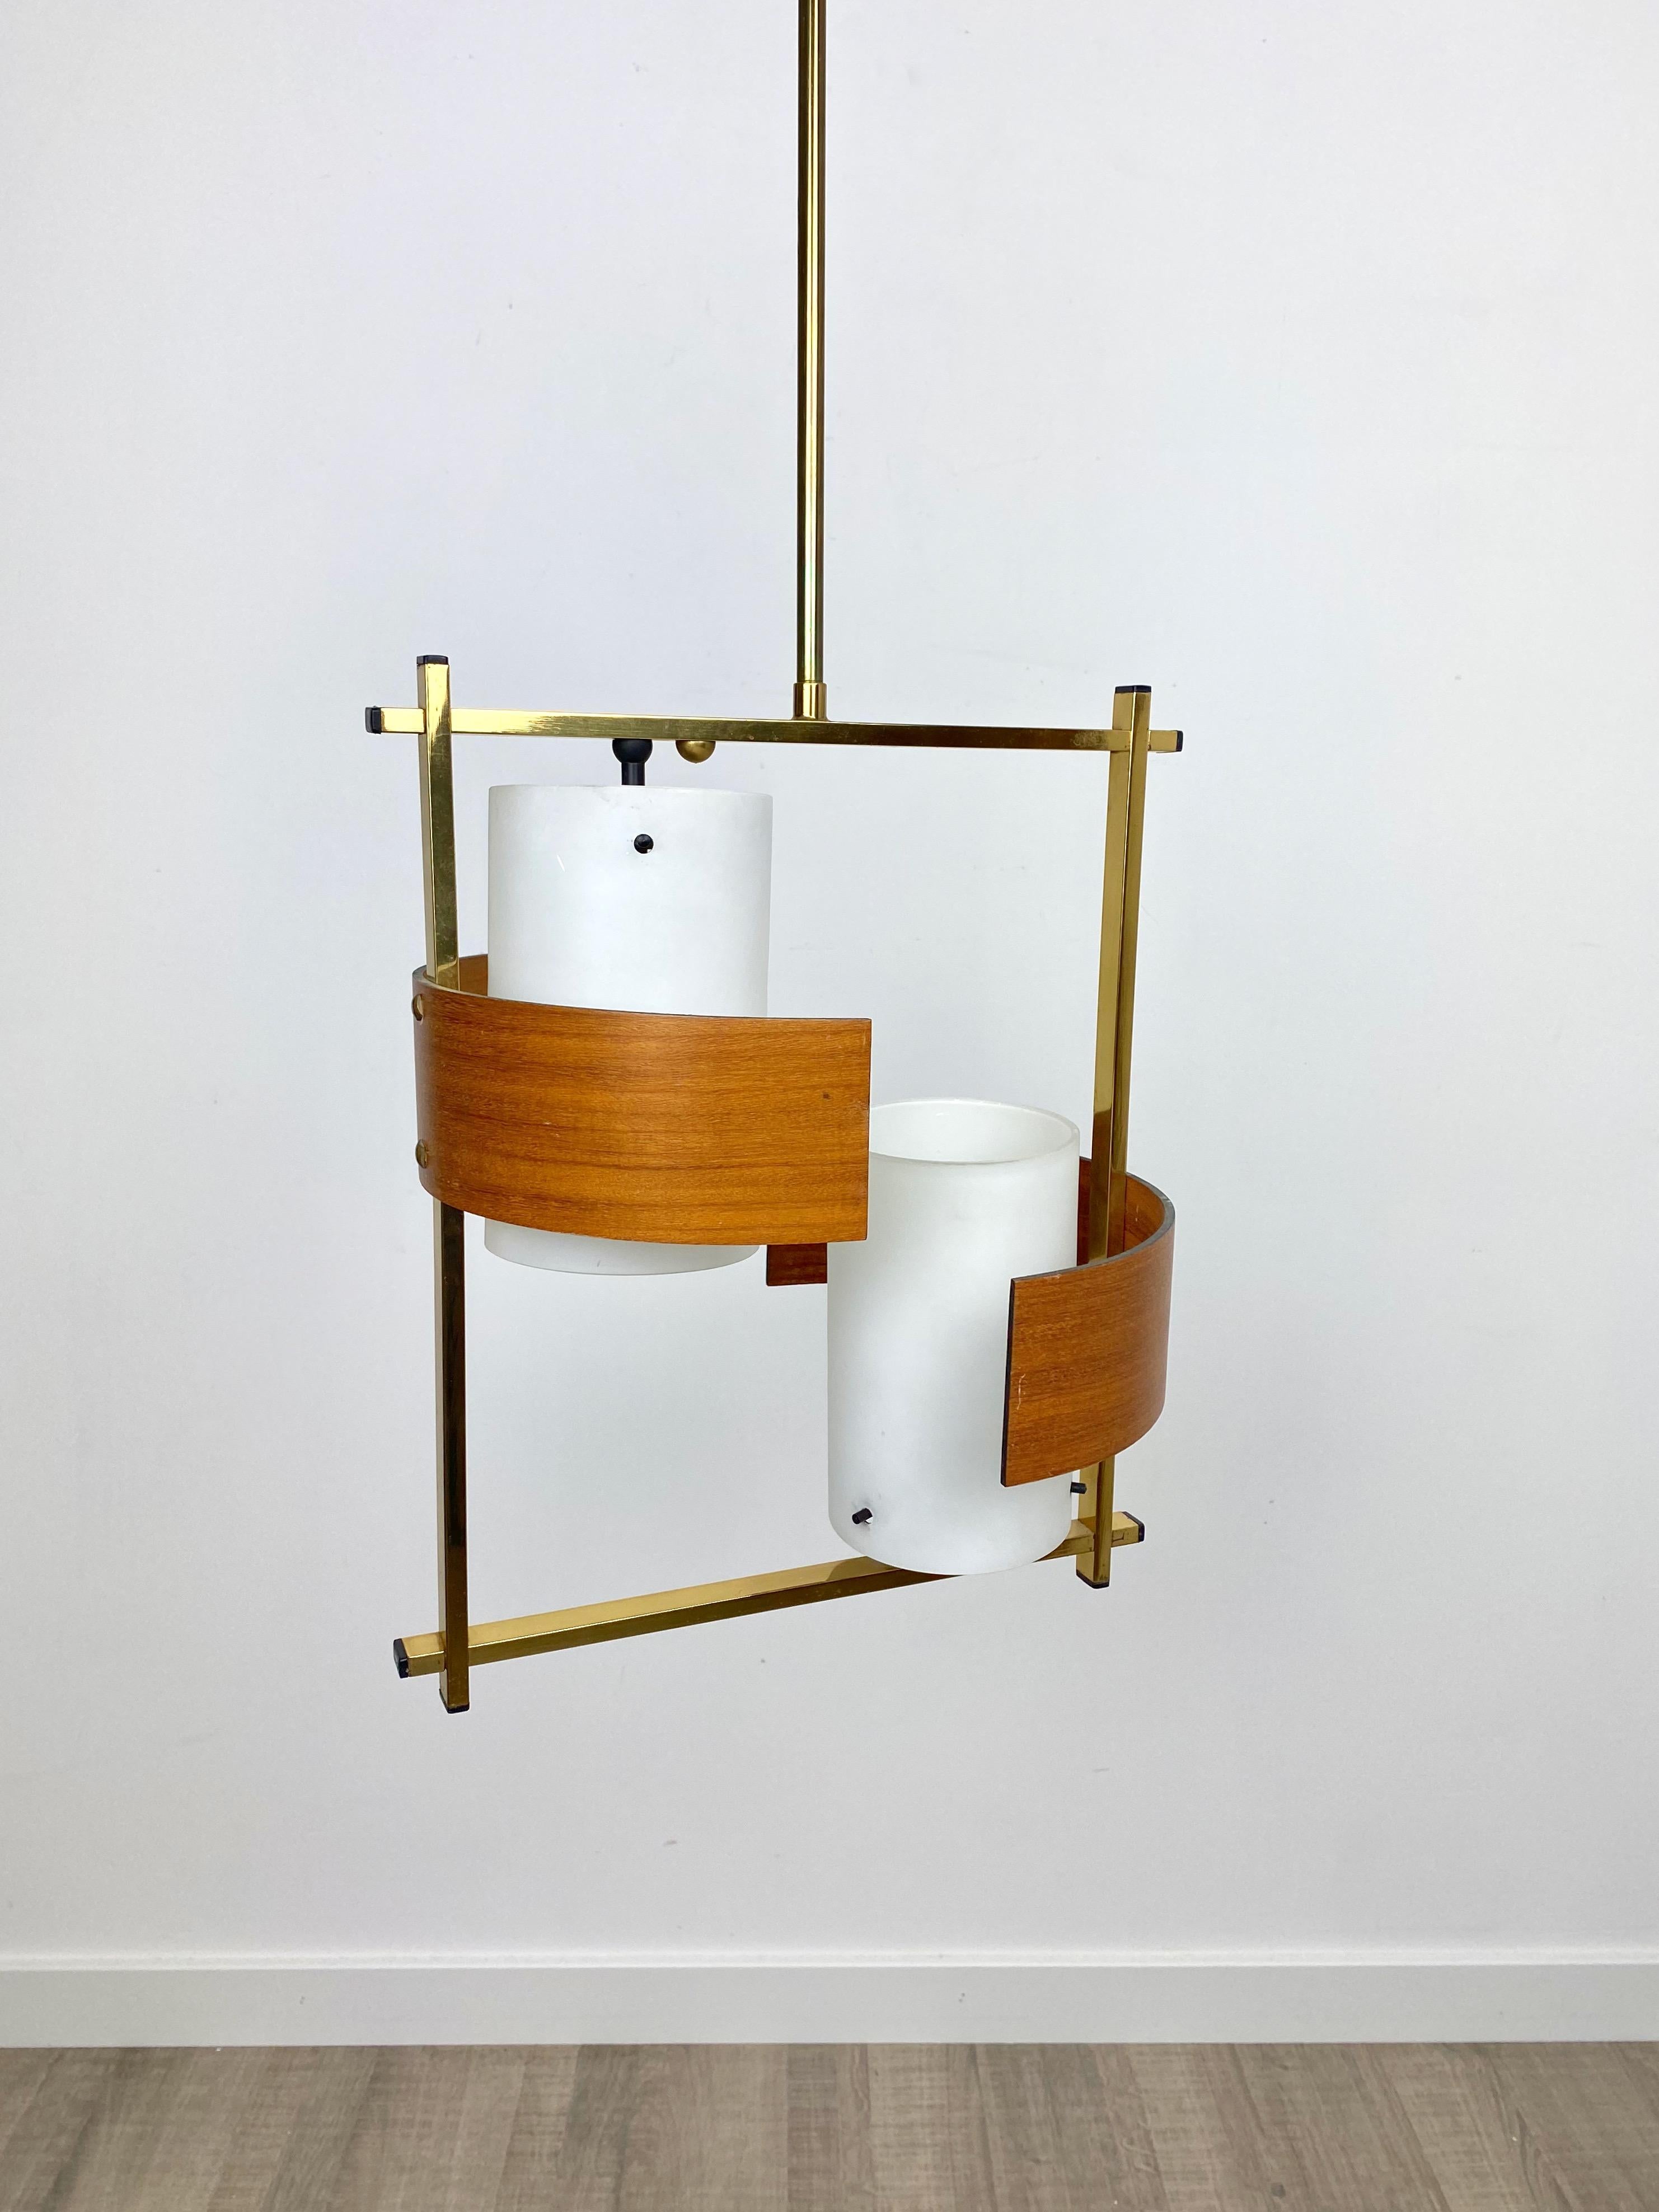 Chandelier in Opaline glass and teak with squared brass details, Stilnovo style, Italy, 1960s.